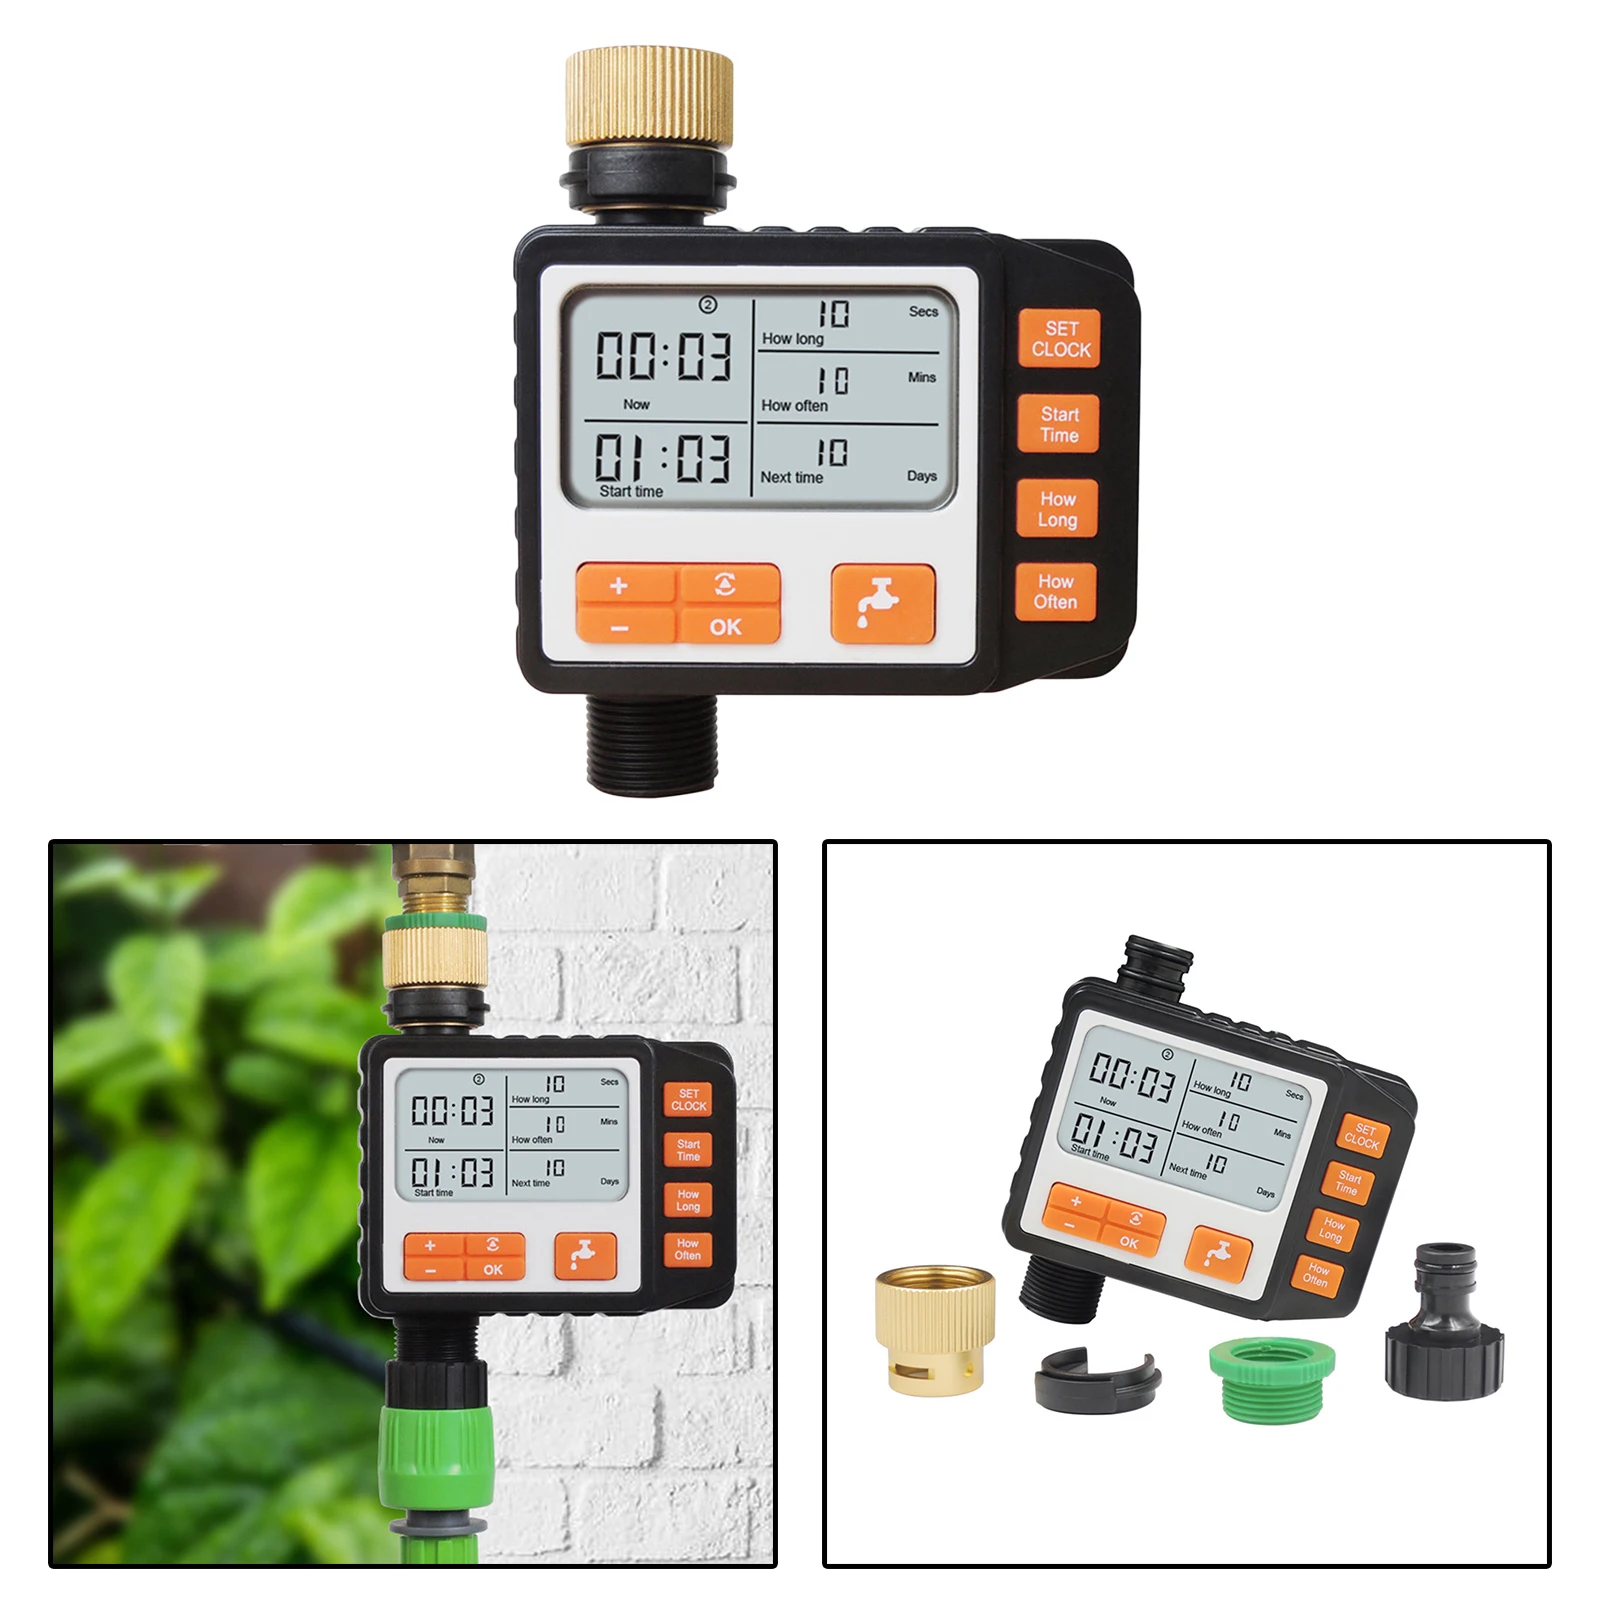 Home Smart Automatic Water Tap Timer Electronic Digital Irrigation Controller Outdoor Garden Sprinkler Watering Timer